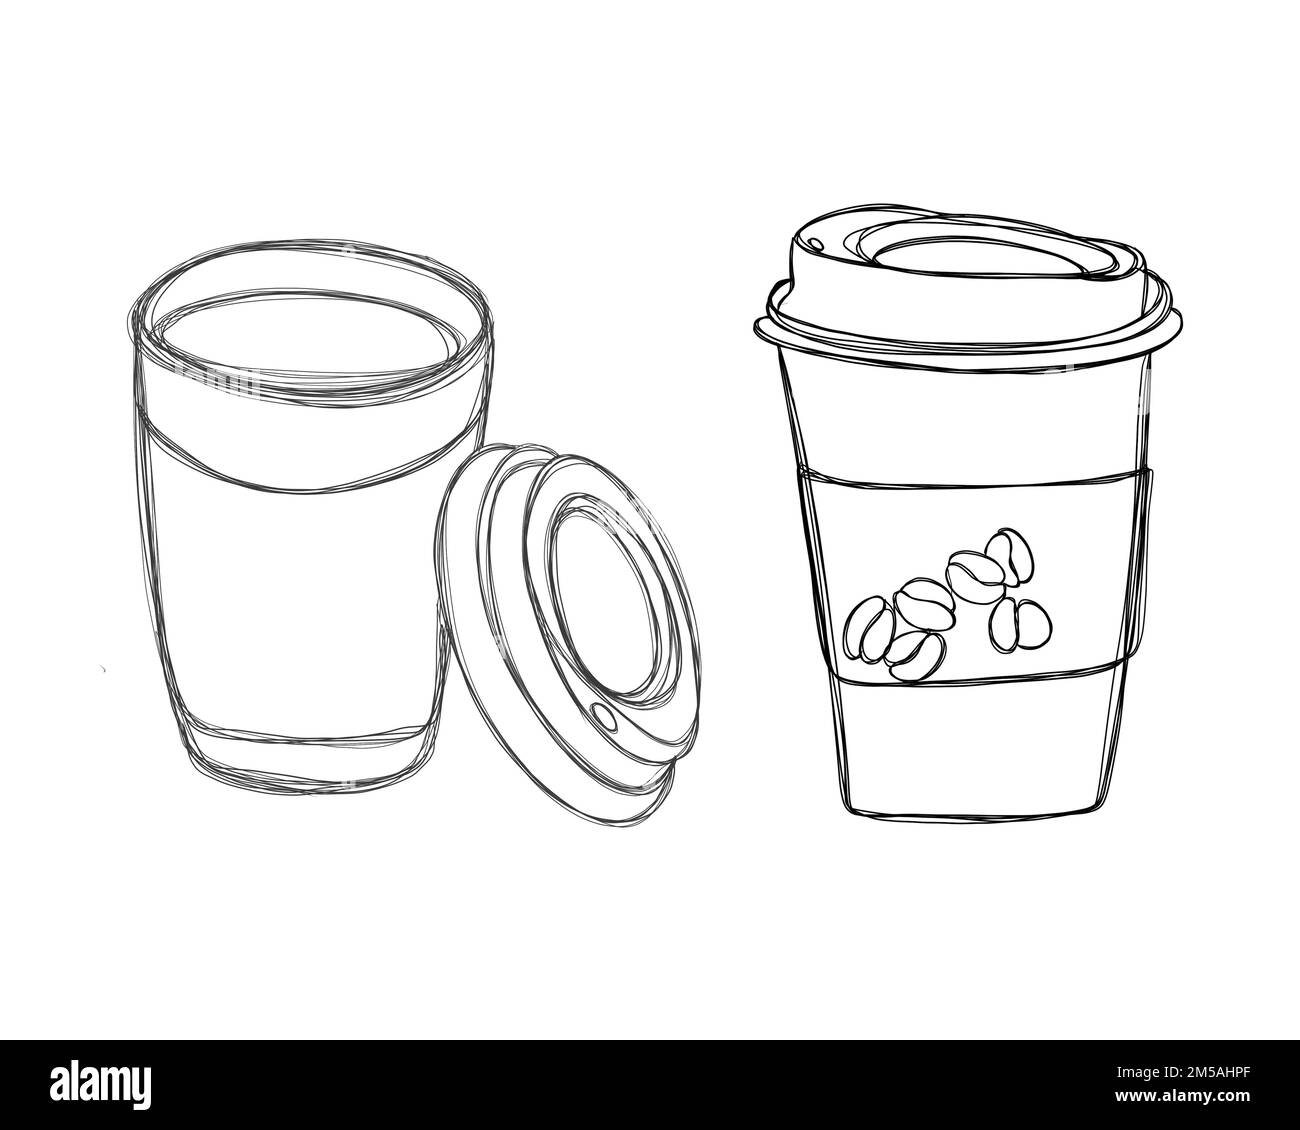 Line art illustration freehand coffee to go- doodle take away coffee cup. Collection of illustrations of glasses with coffee Stock Photo